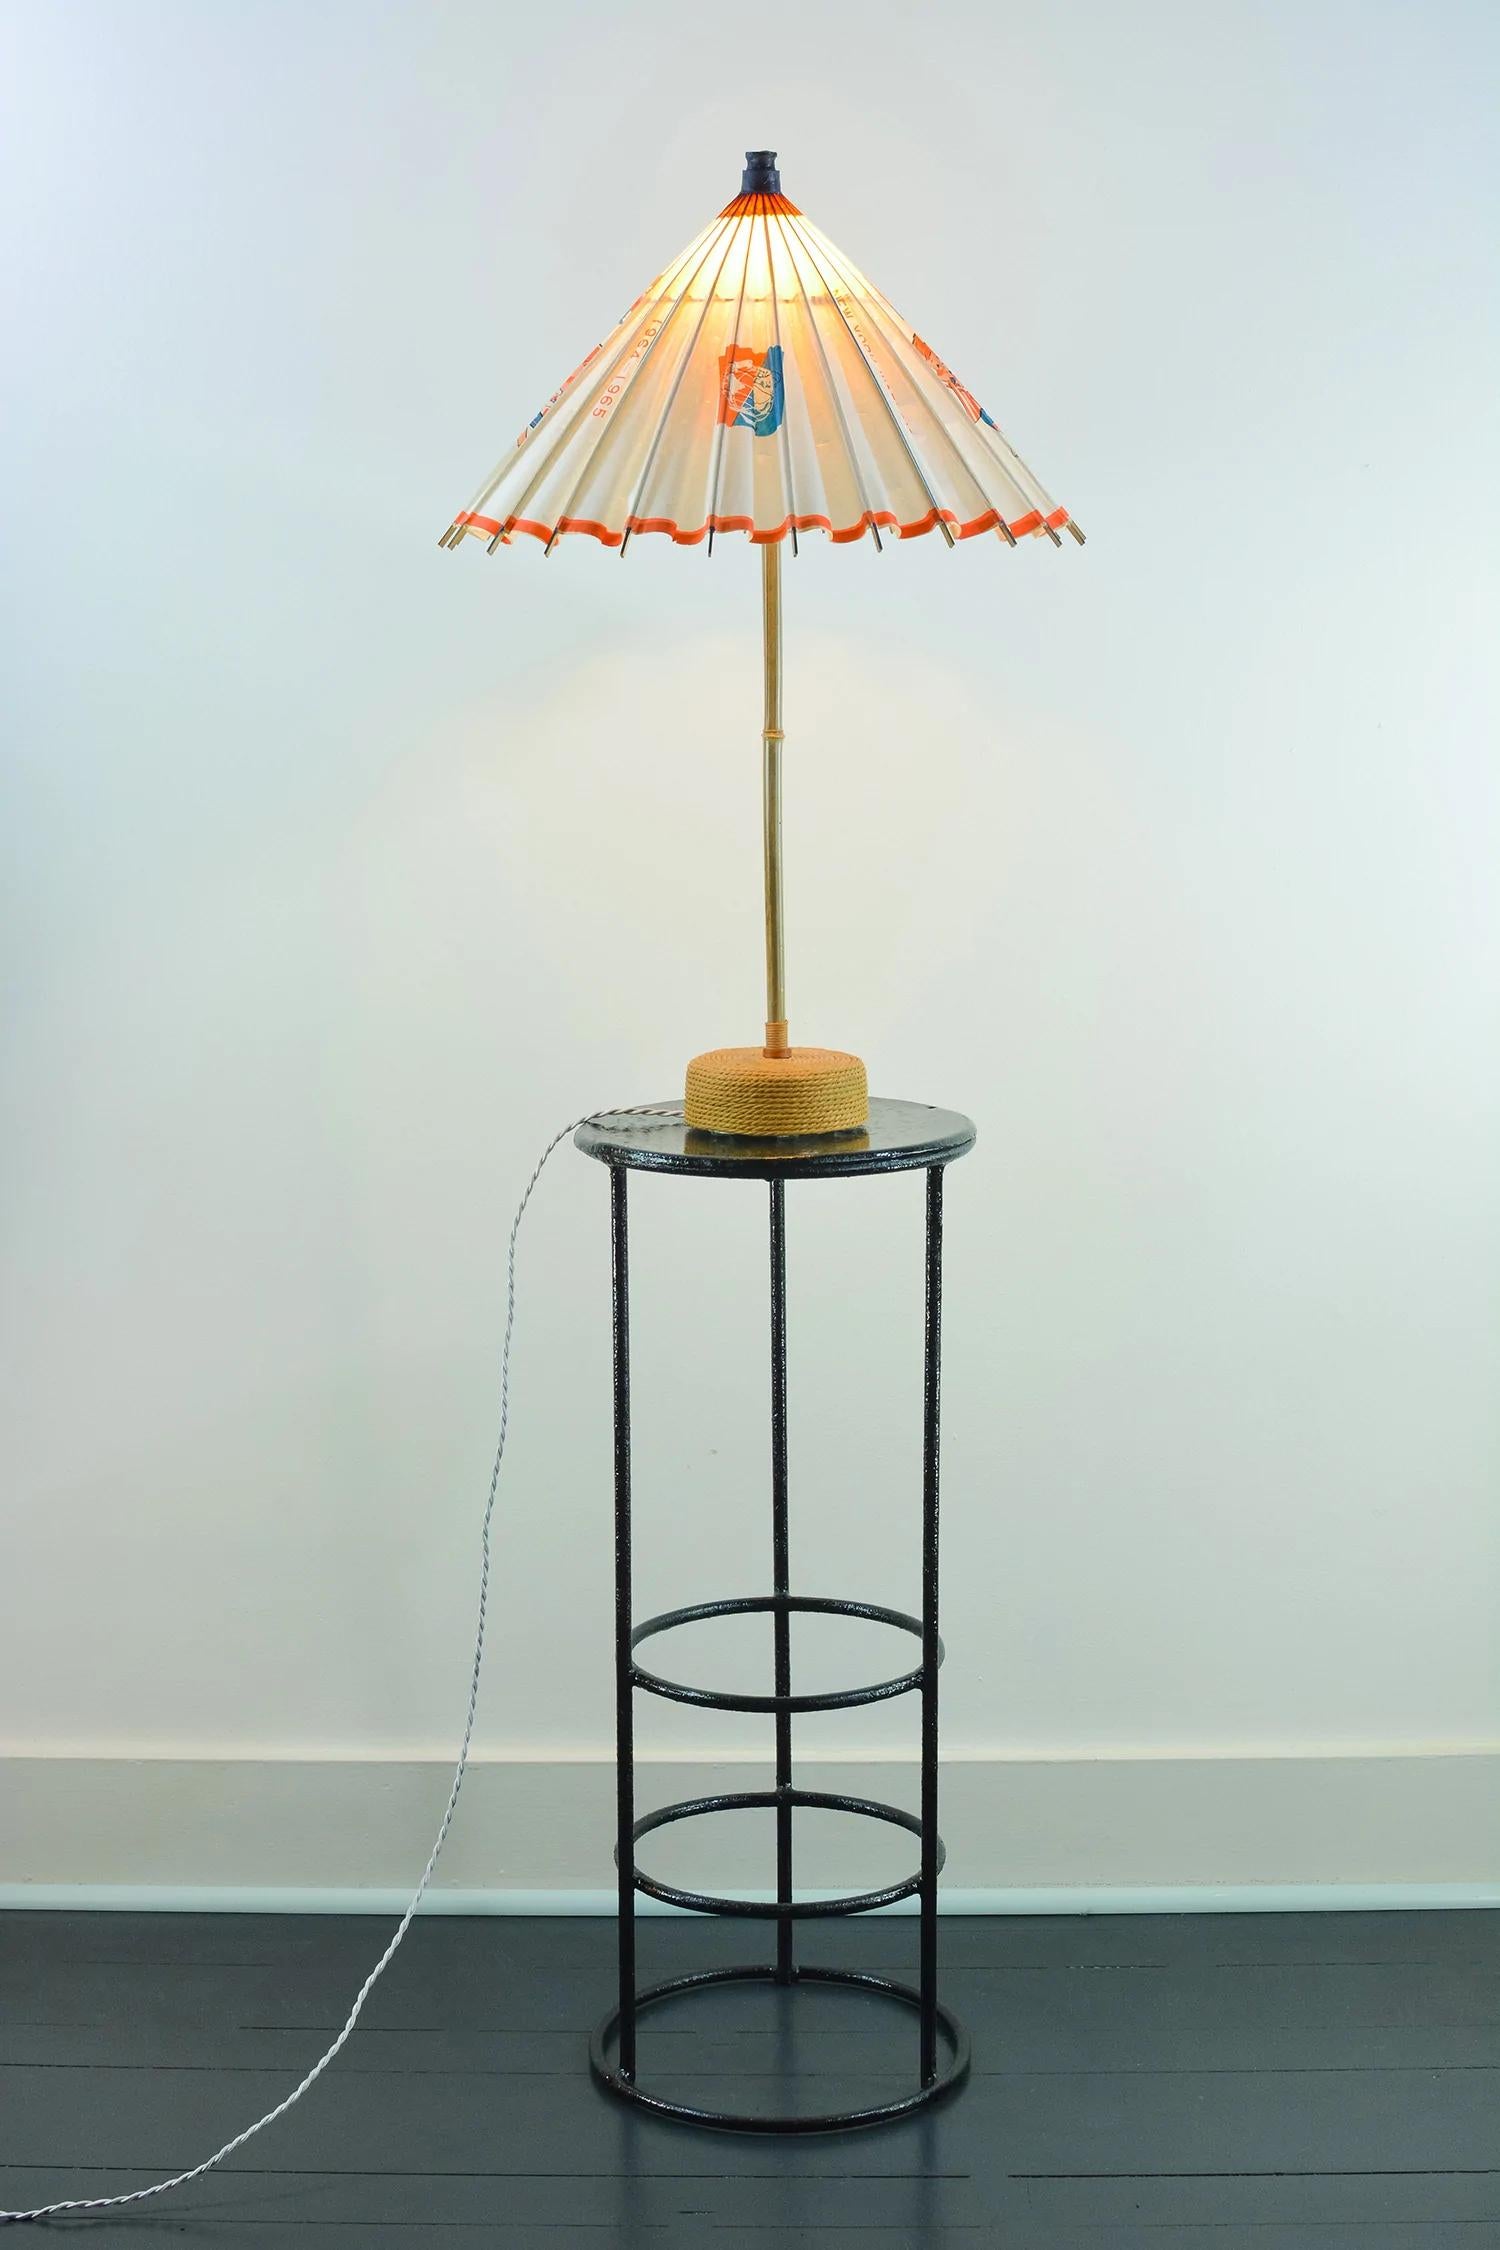 The World’s Fair Collection is a family of fixtures handmade from sustainably sourced materials and upcycled antique paper parasols given to visitors at the 20th century’s most illustrious cultural expo.

Model No. 005 features a rice-paper shade